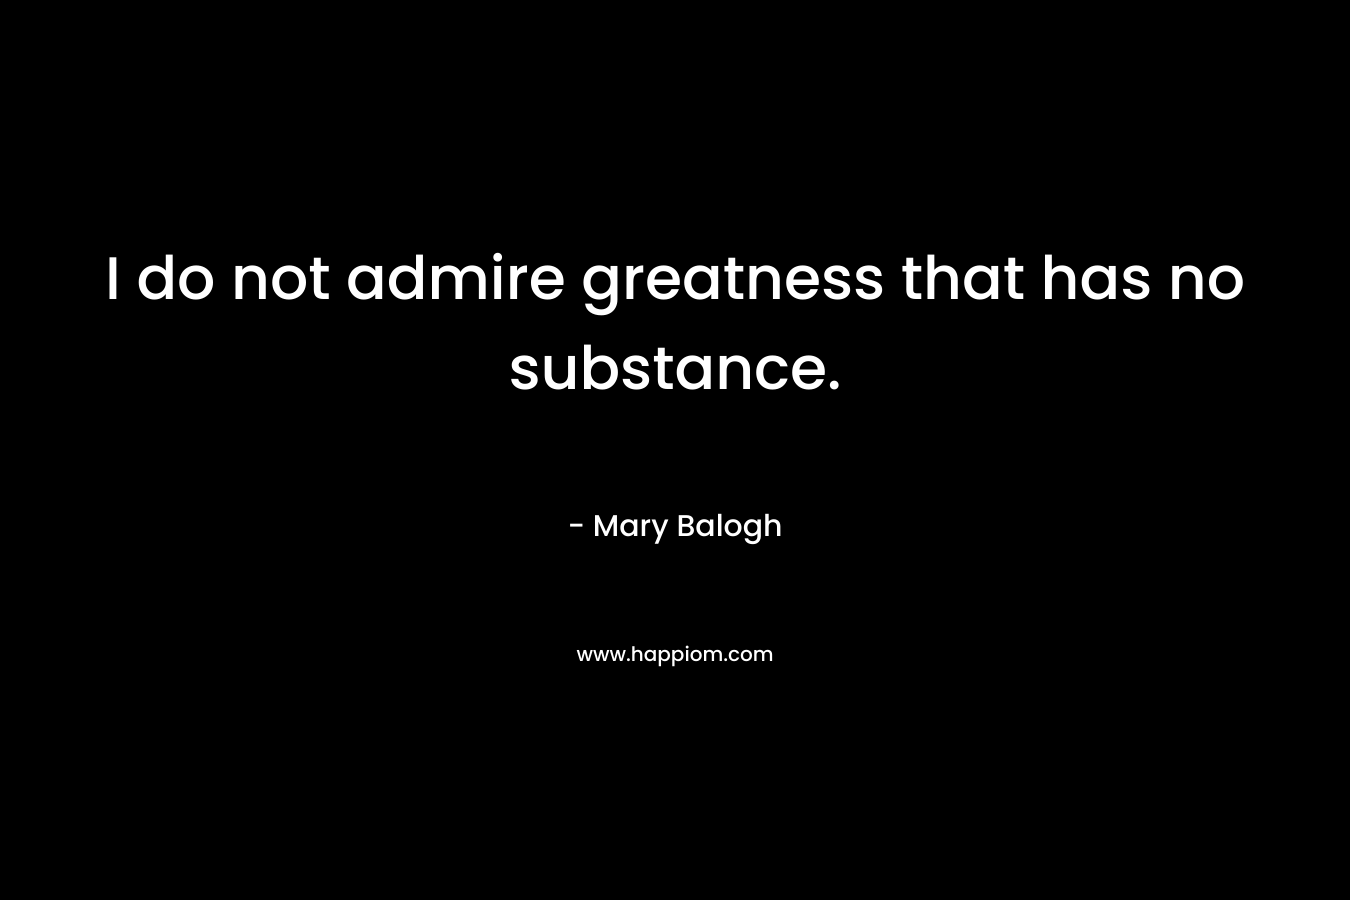 I do not admire greatness that has no substance. – Mary Balogh